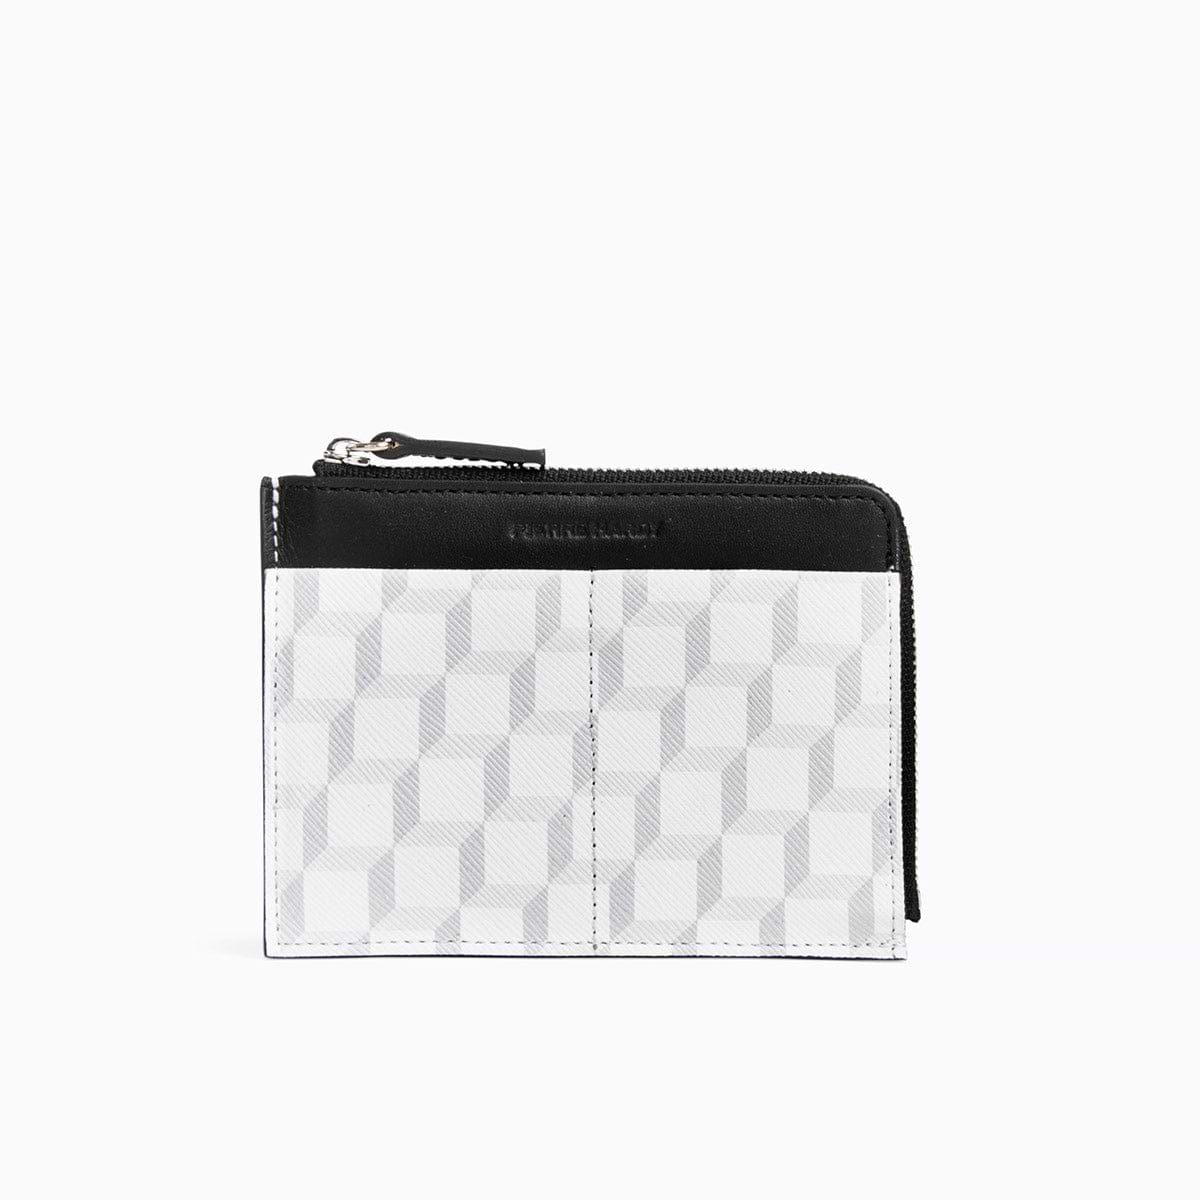 RL White Red Men's Wallet (W37-WH-RD) : Amazon.in: Bags, Wallets and Luggage